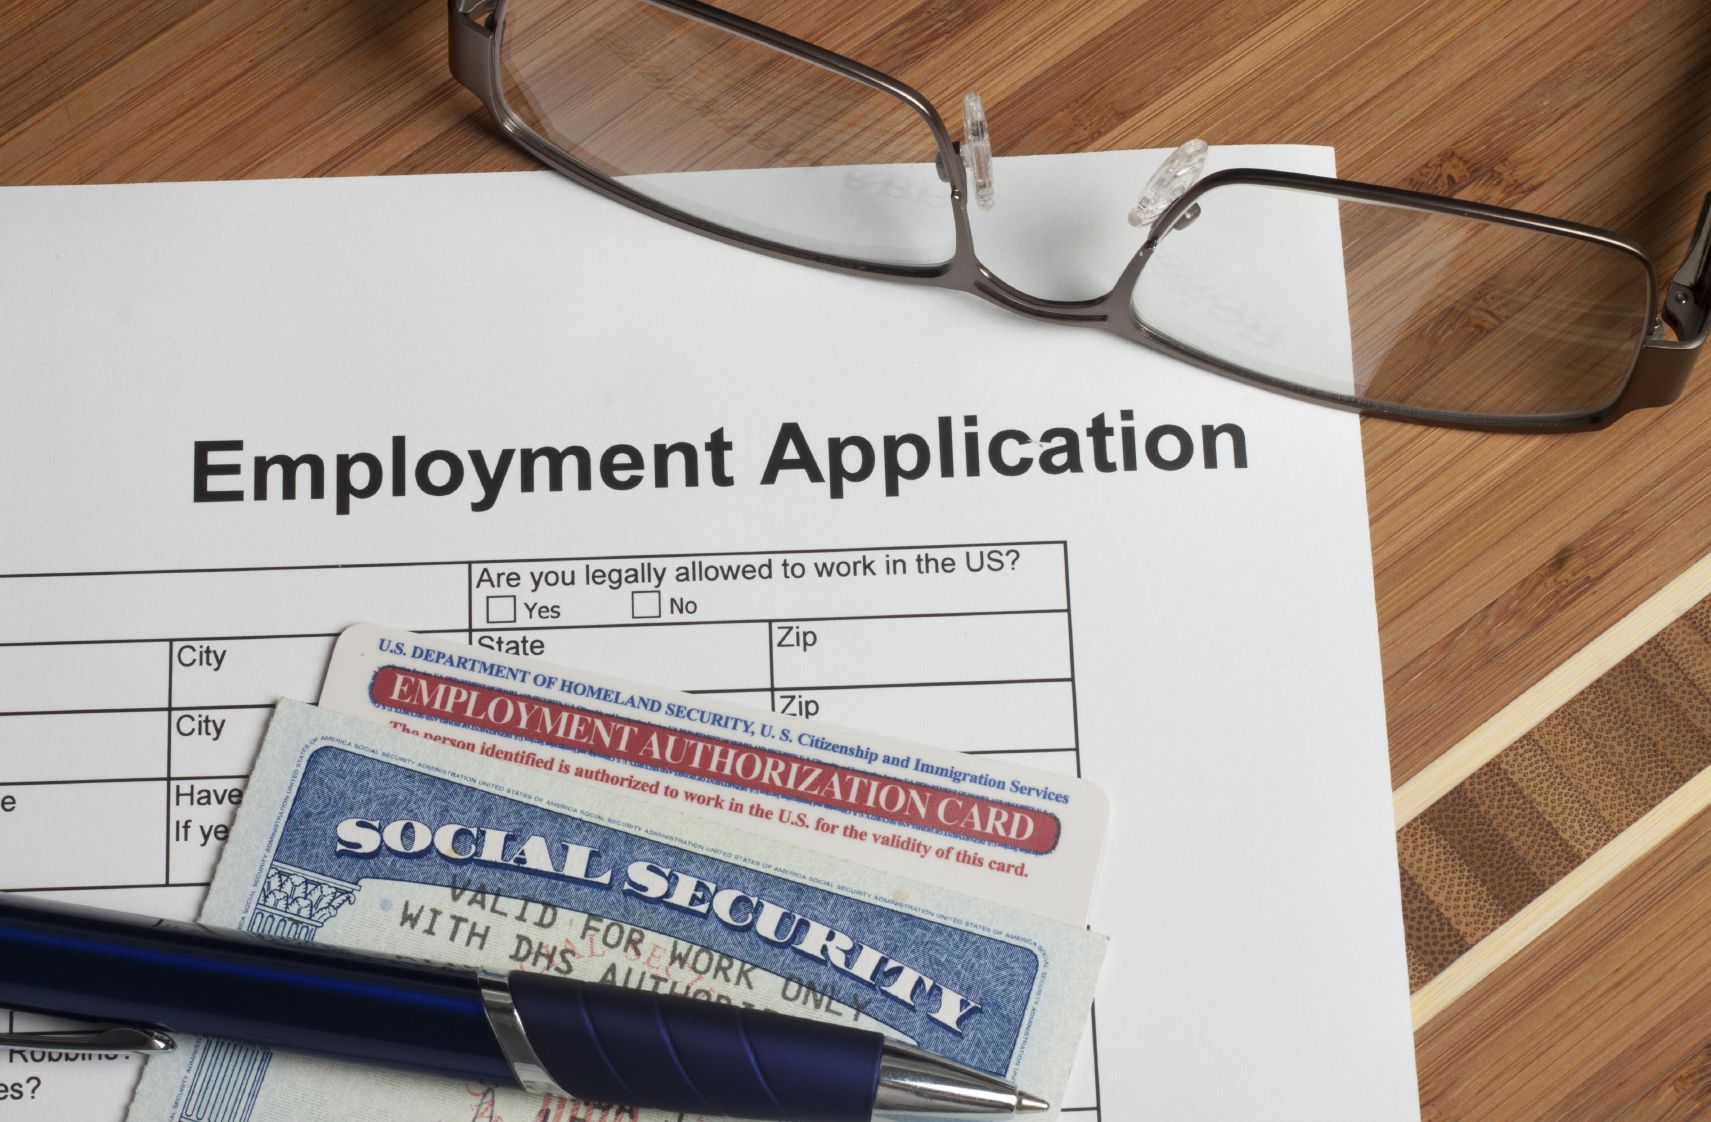 Giving social security number on job applications